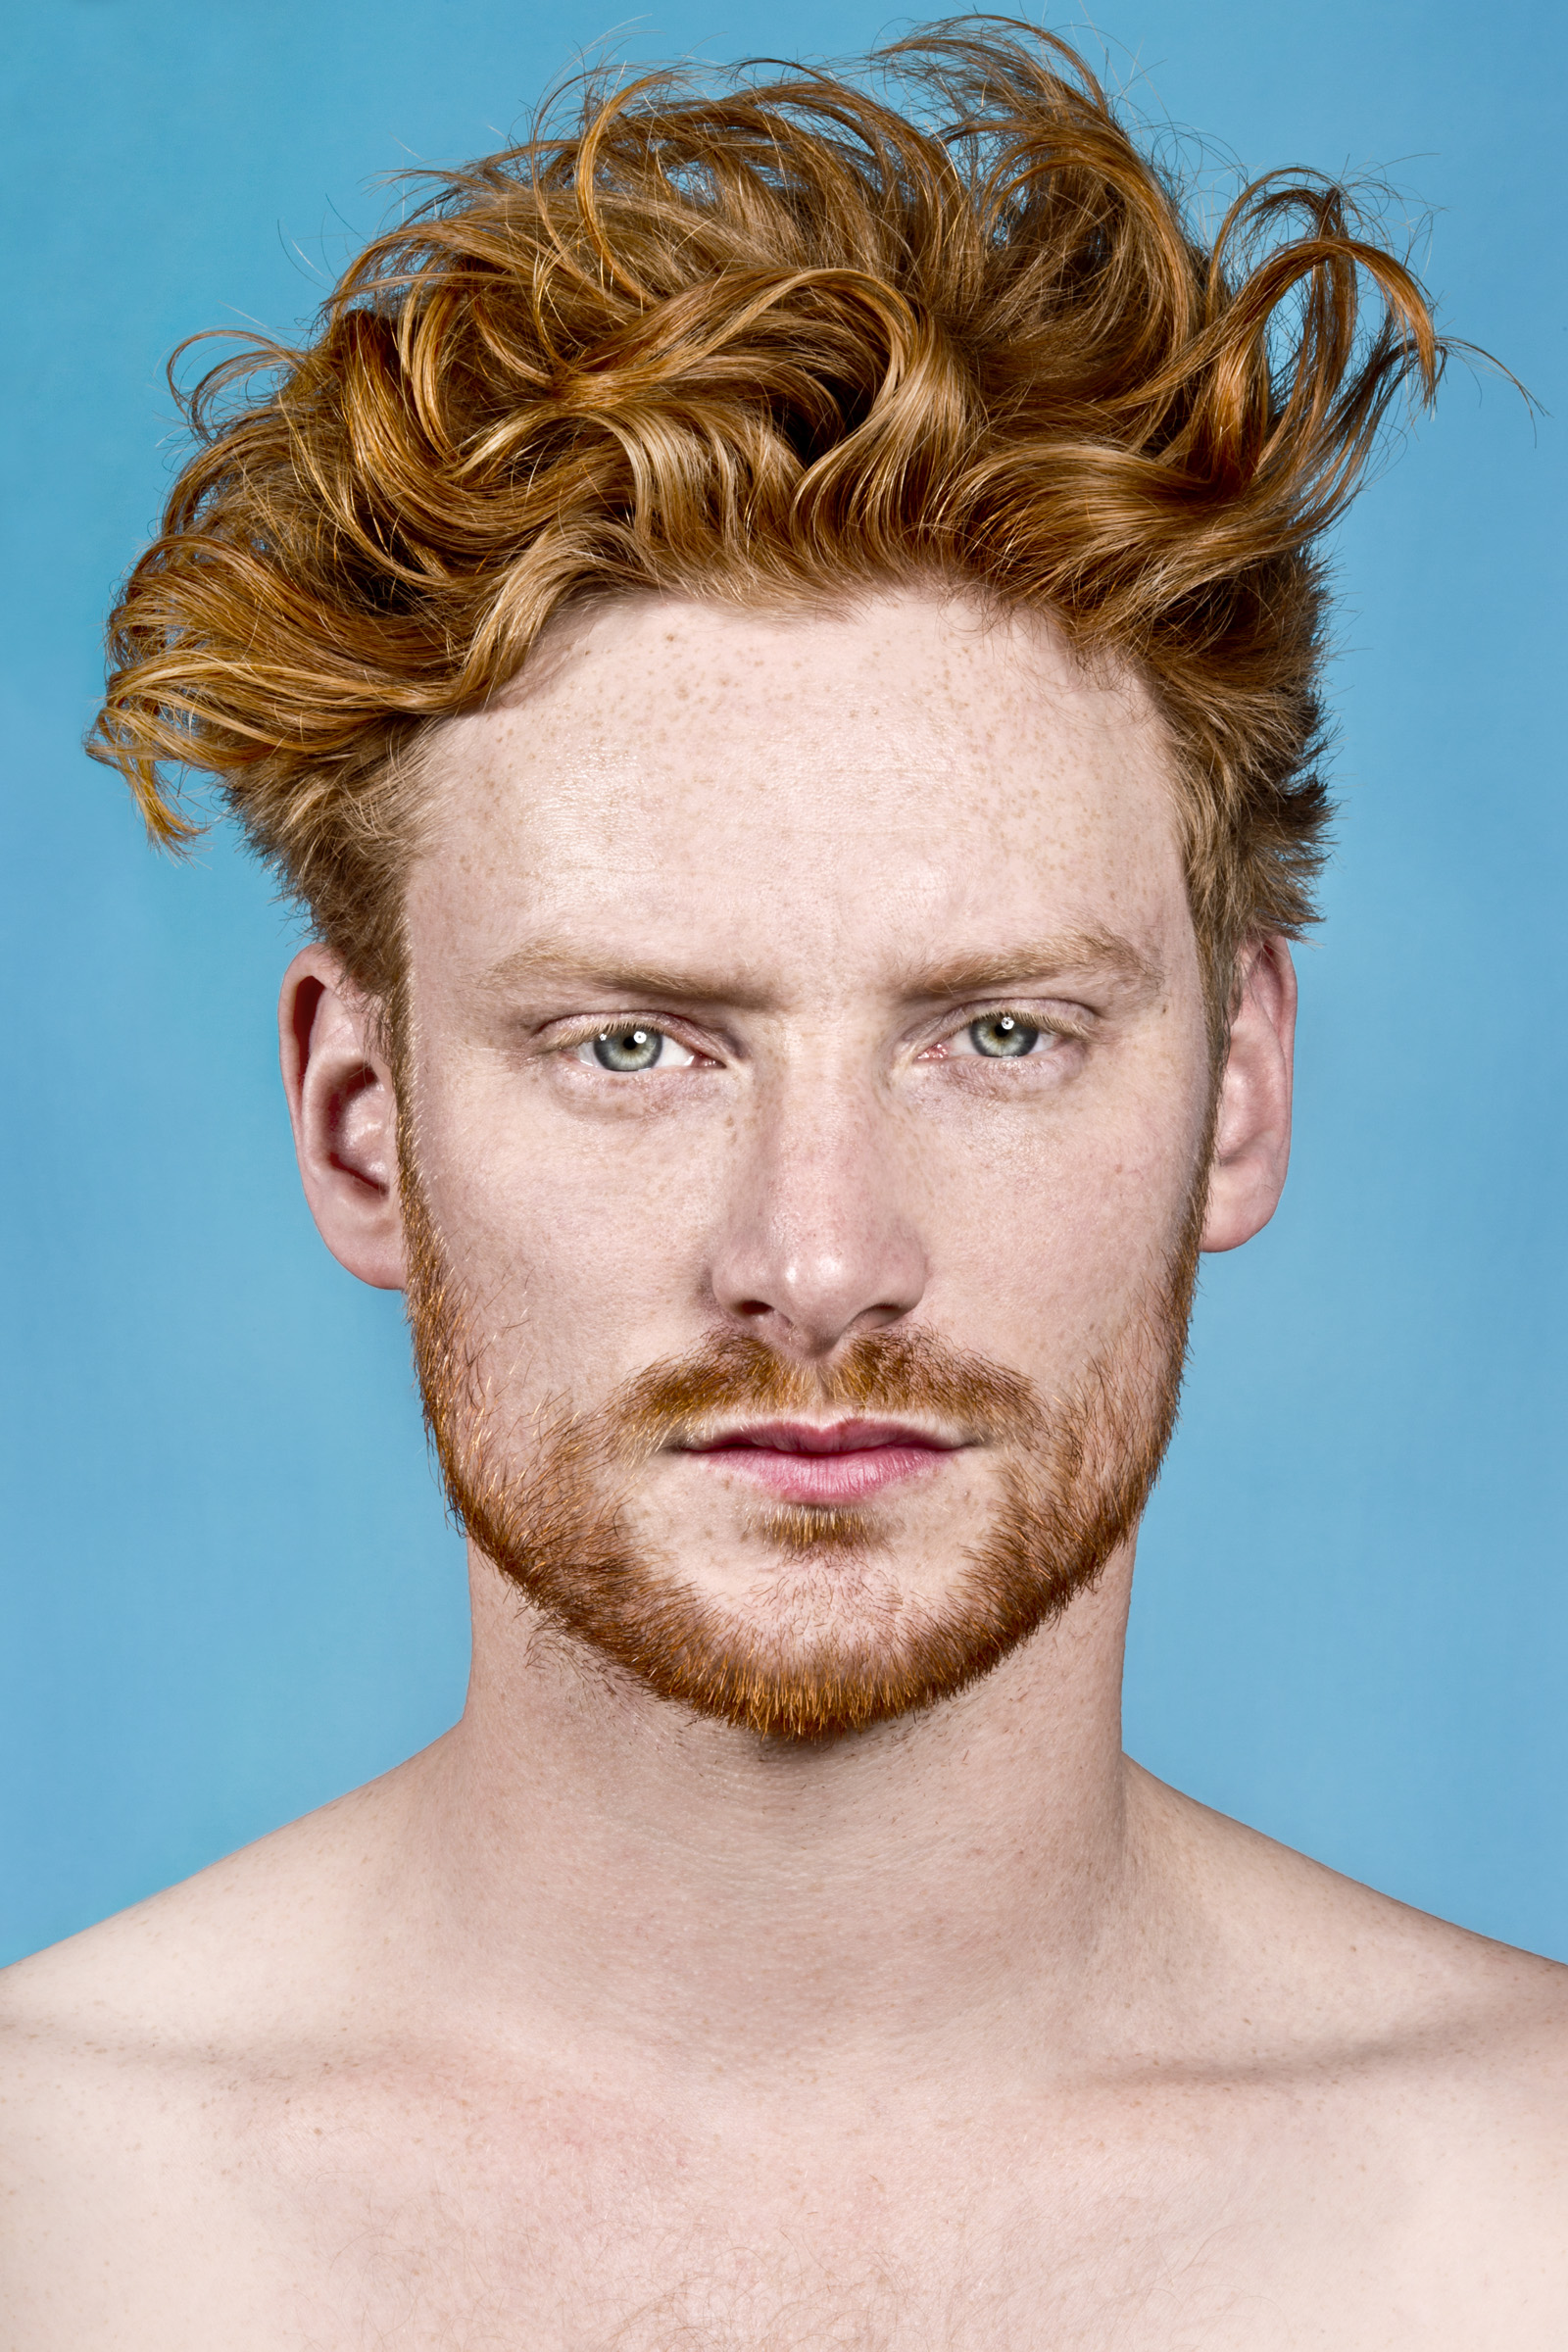 Red Hot Rebranding The Ginger Male Stereotype 